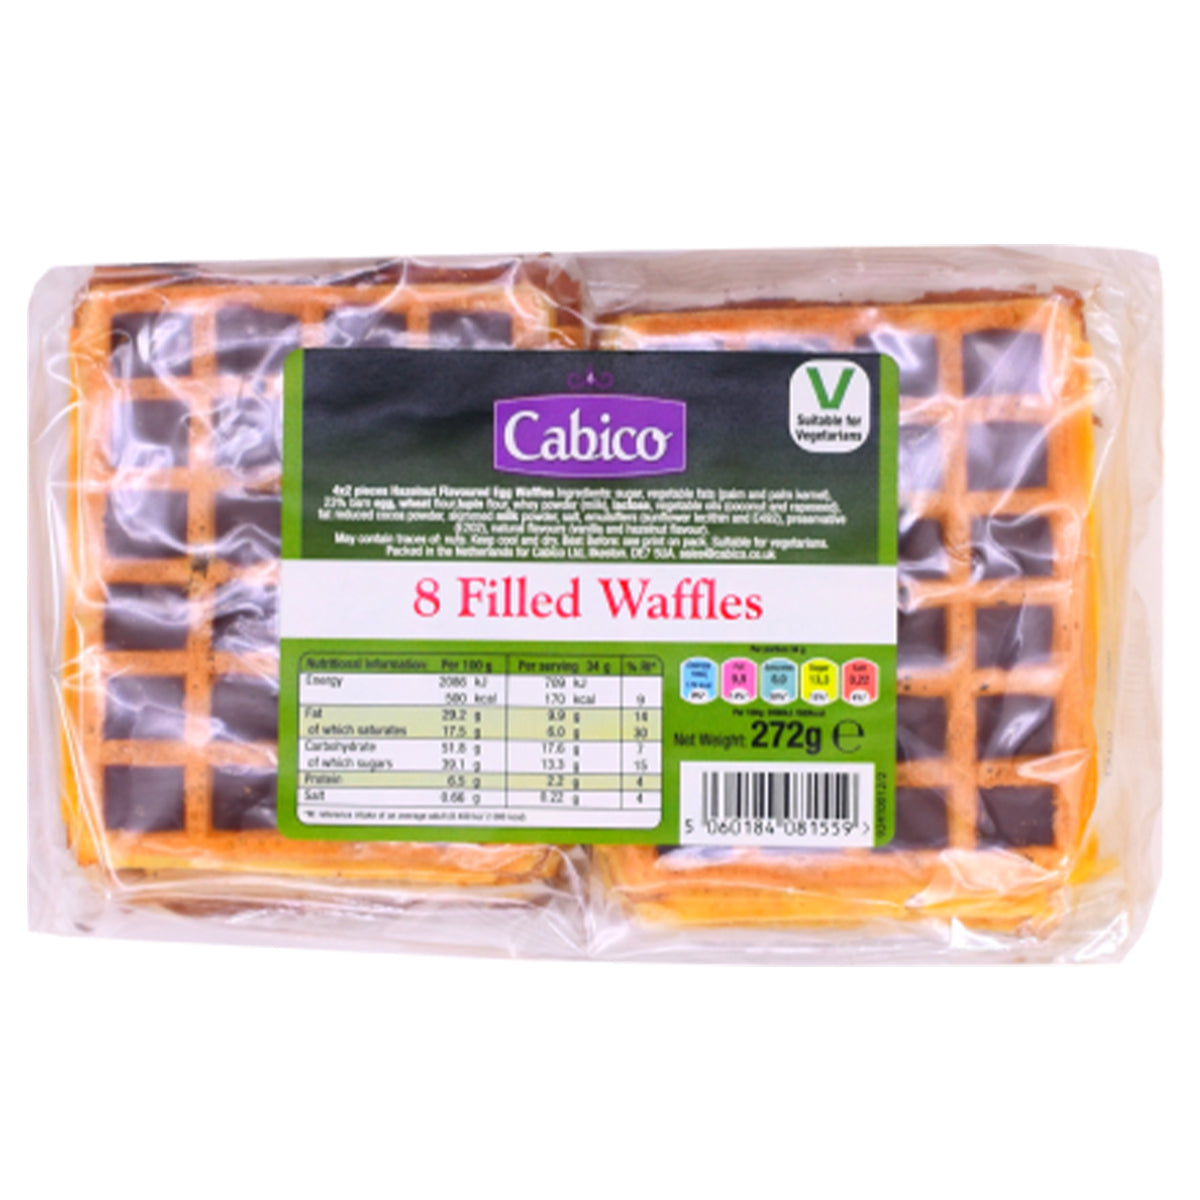 A package of Cabico Filled Waffles on a white background.